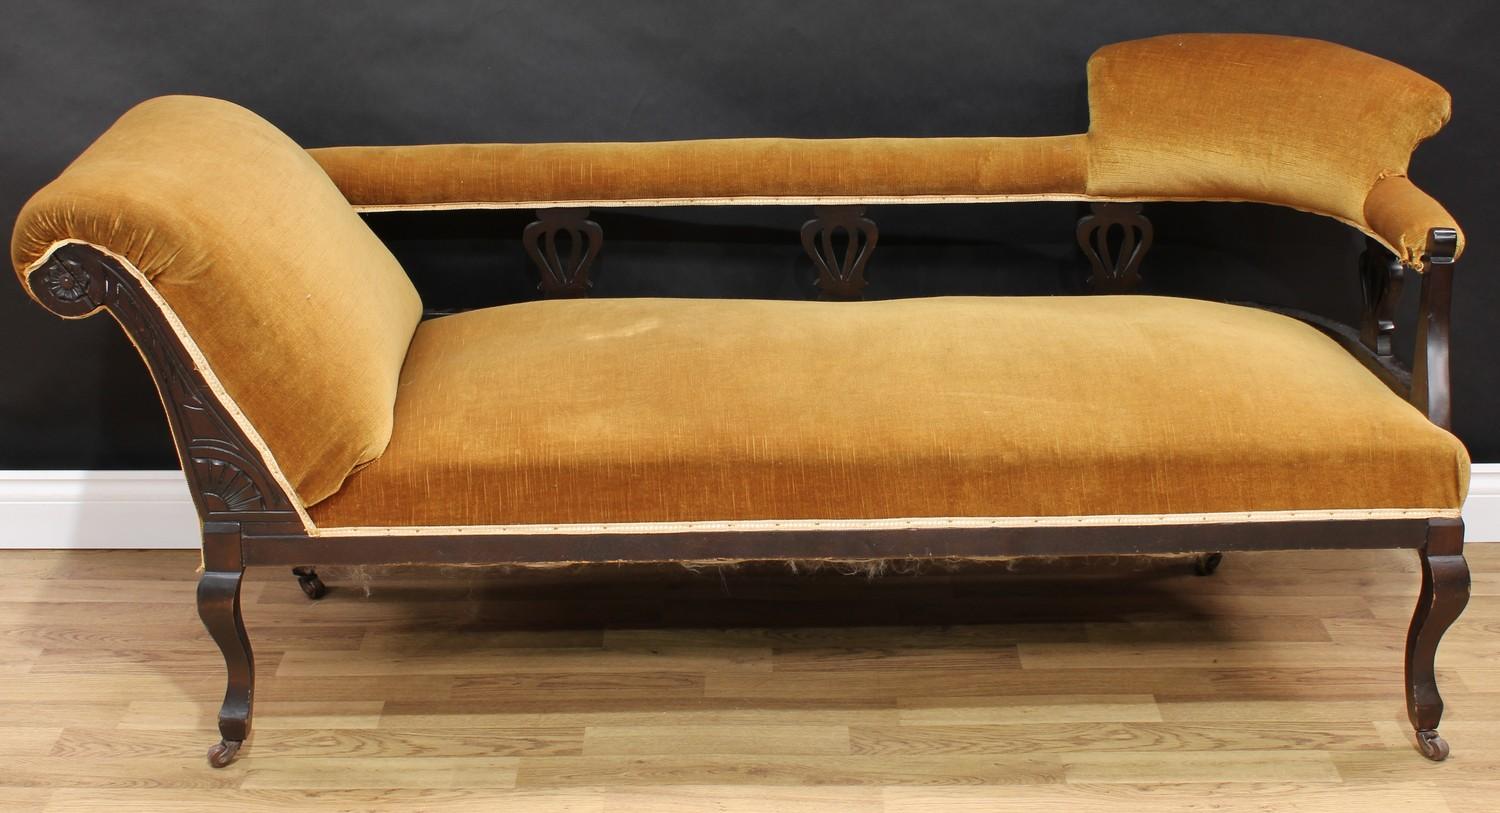 An Edwardian chaise longue or day bed, curved cresting rail to support a formally seated